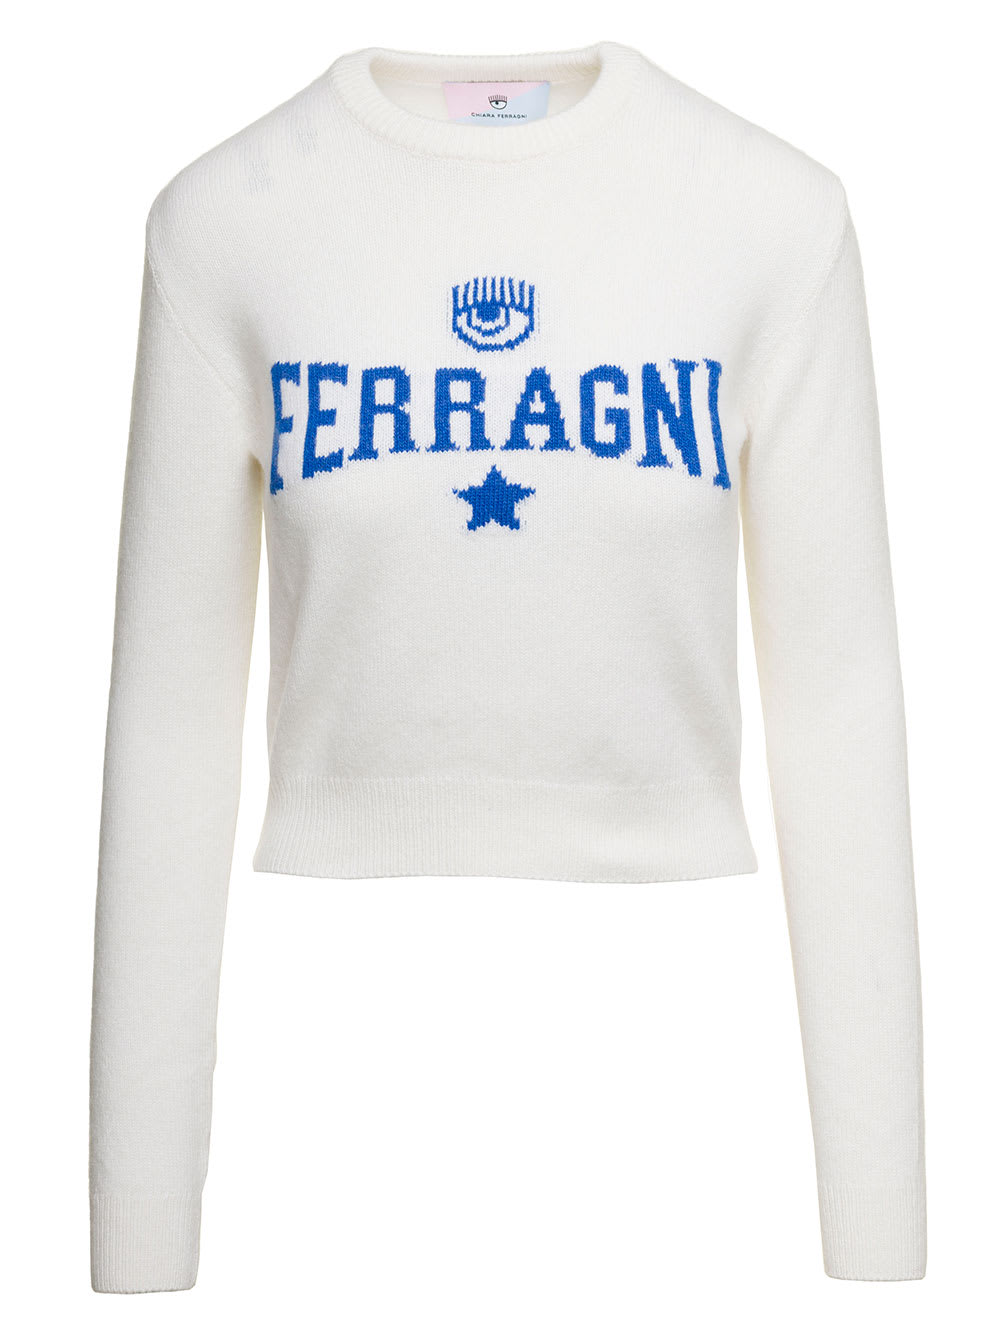 CHIARA FERRAGNI WHITE LONG-SLEEVED SWEATER WITH CONTRASTING MAXI LOGO IN WOOL BLEND WOMAN